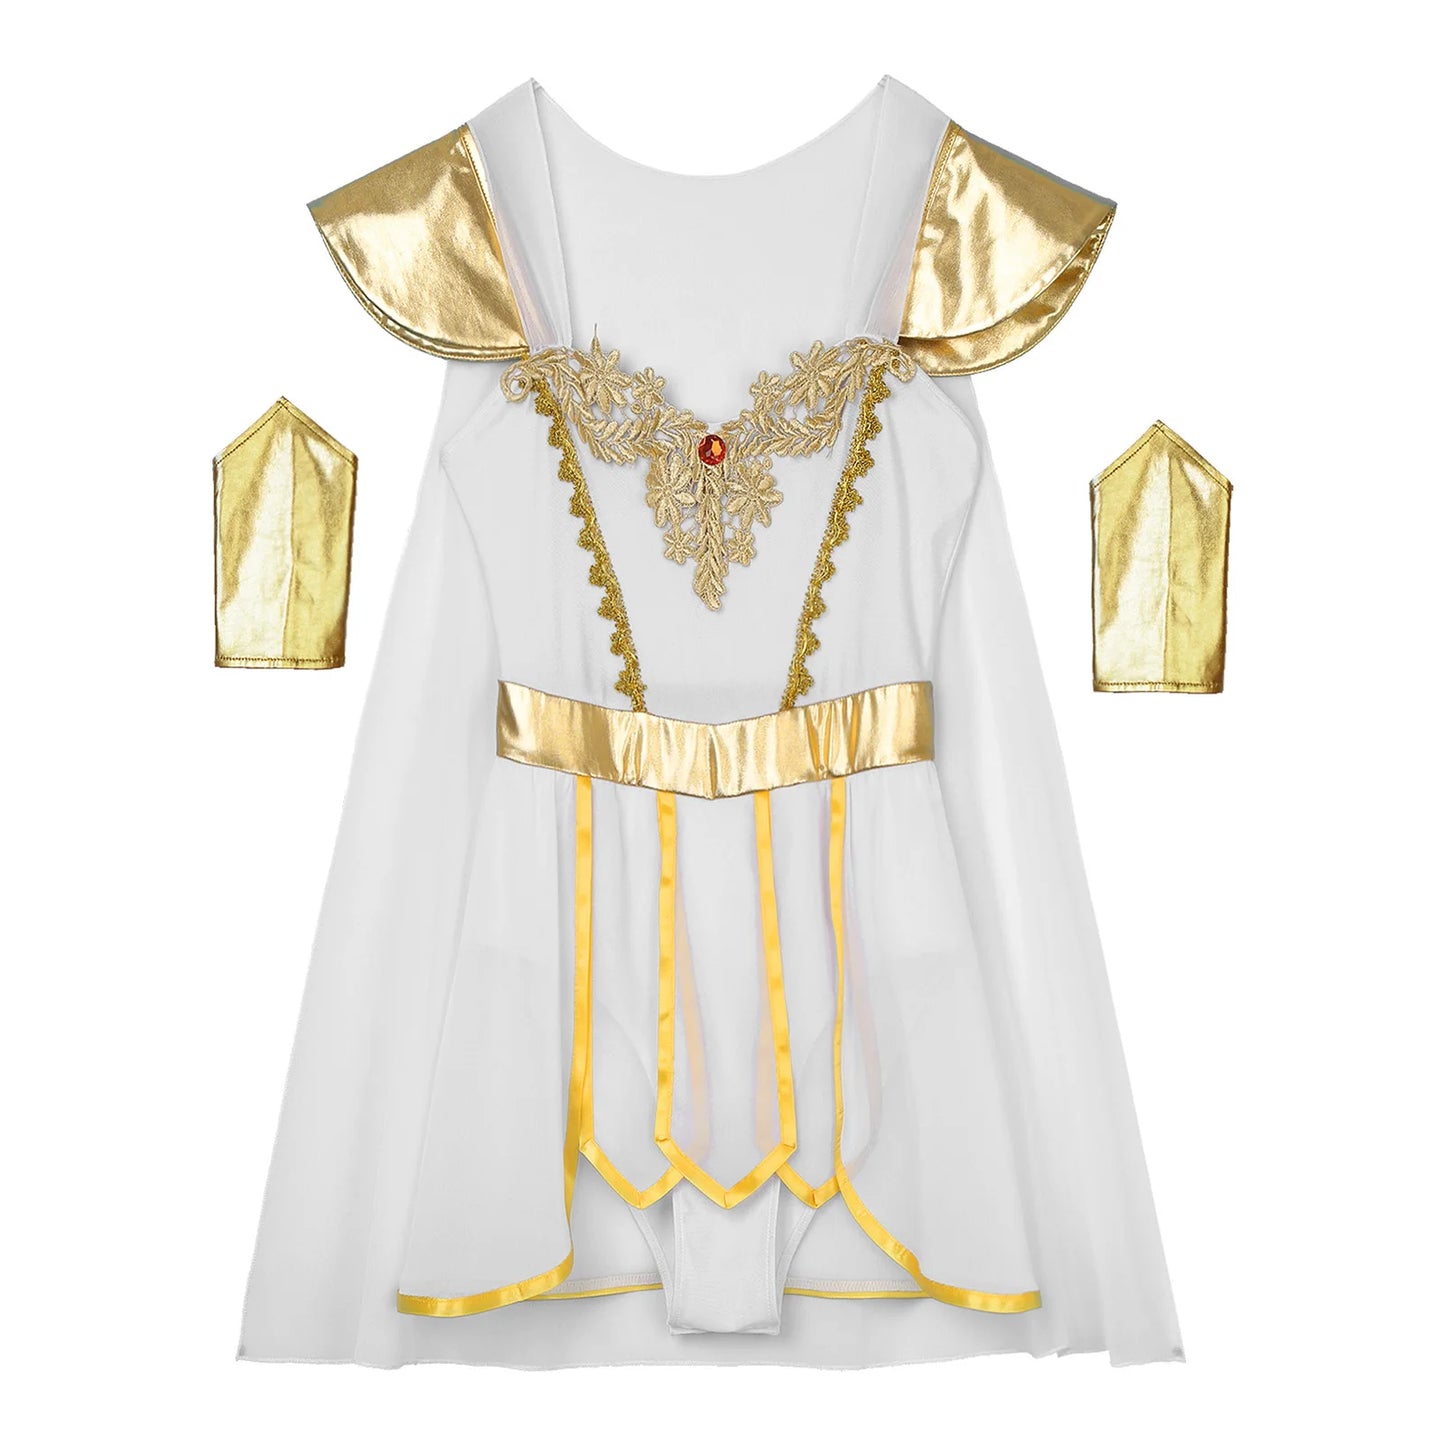 Womens Ancient Roman Bodysuit Toga Costumes Integrated Cape Petal Skirt Bodysuit with Metallic Wristbands for Halloween Dress-Up